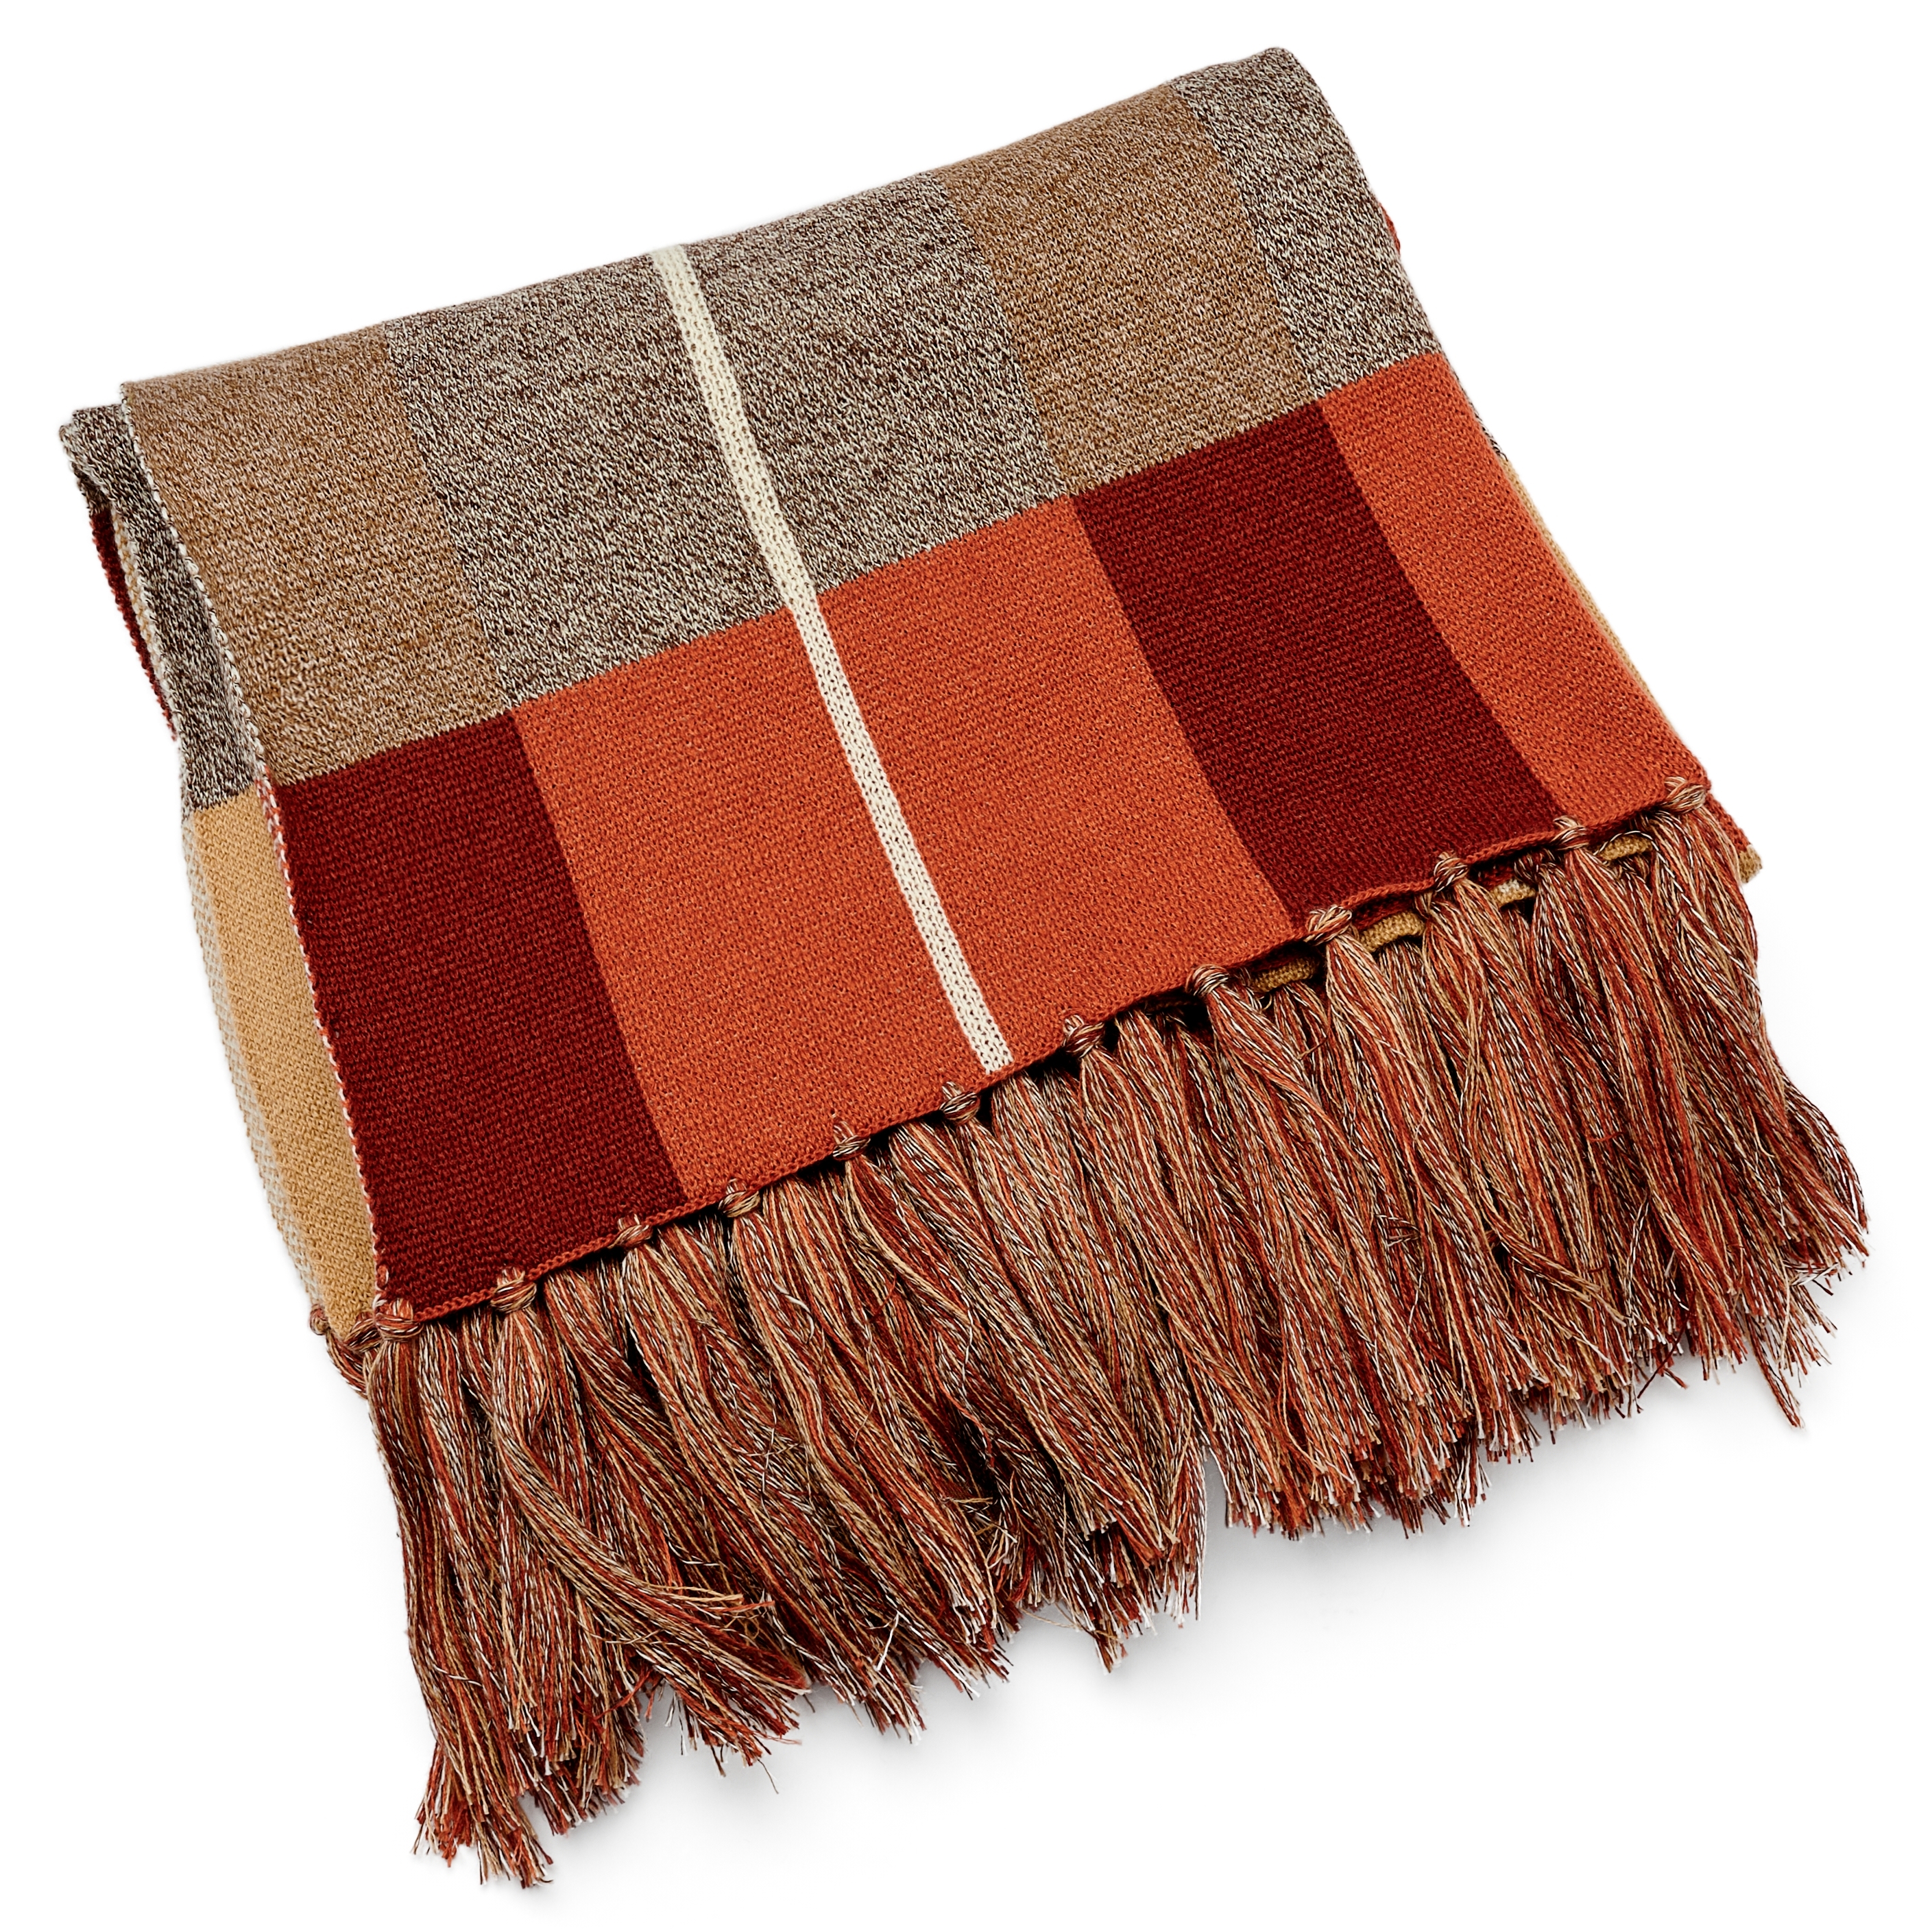 Hiems, Brown and Burgundy Plaid Scarf, In stock!